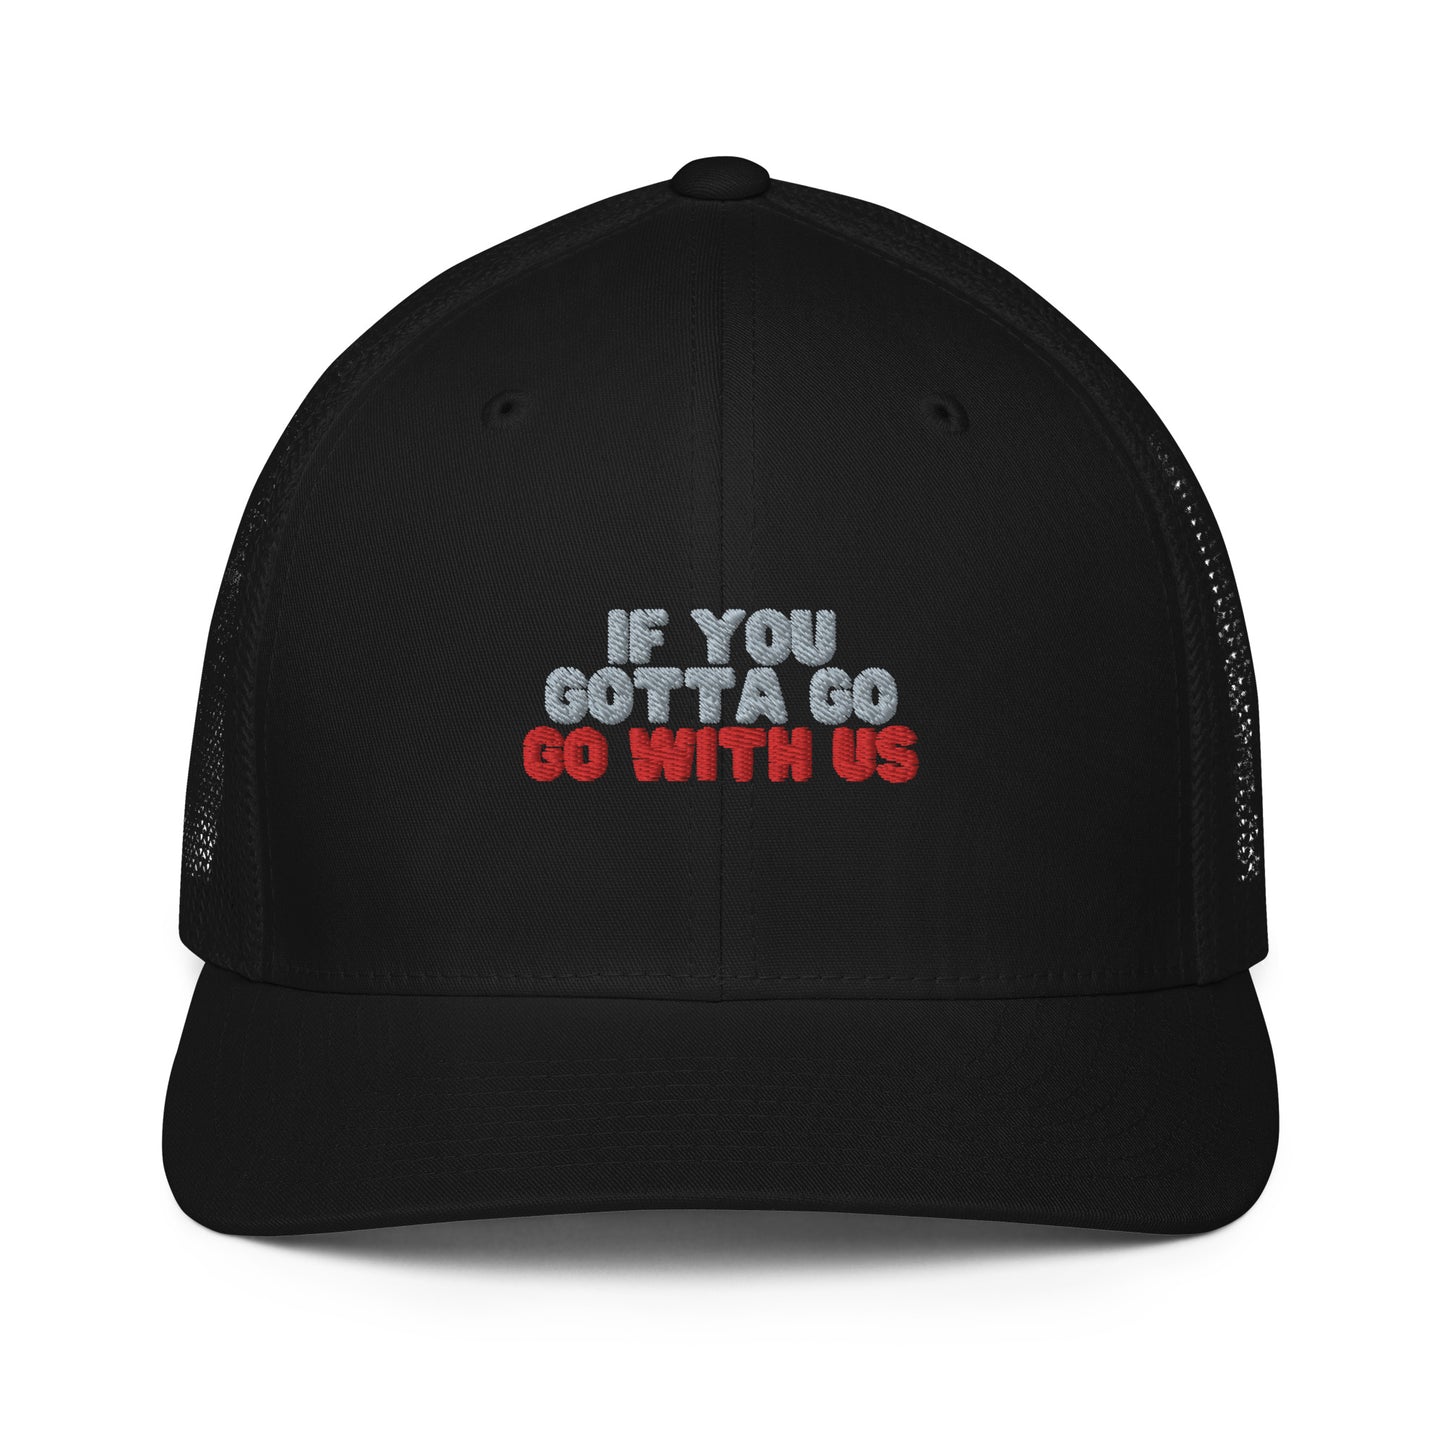 “If you gotta go, go with us” Closed-back trucker cap